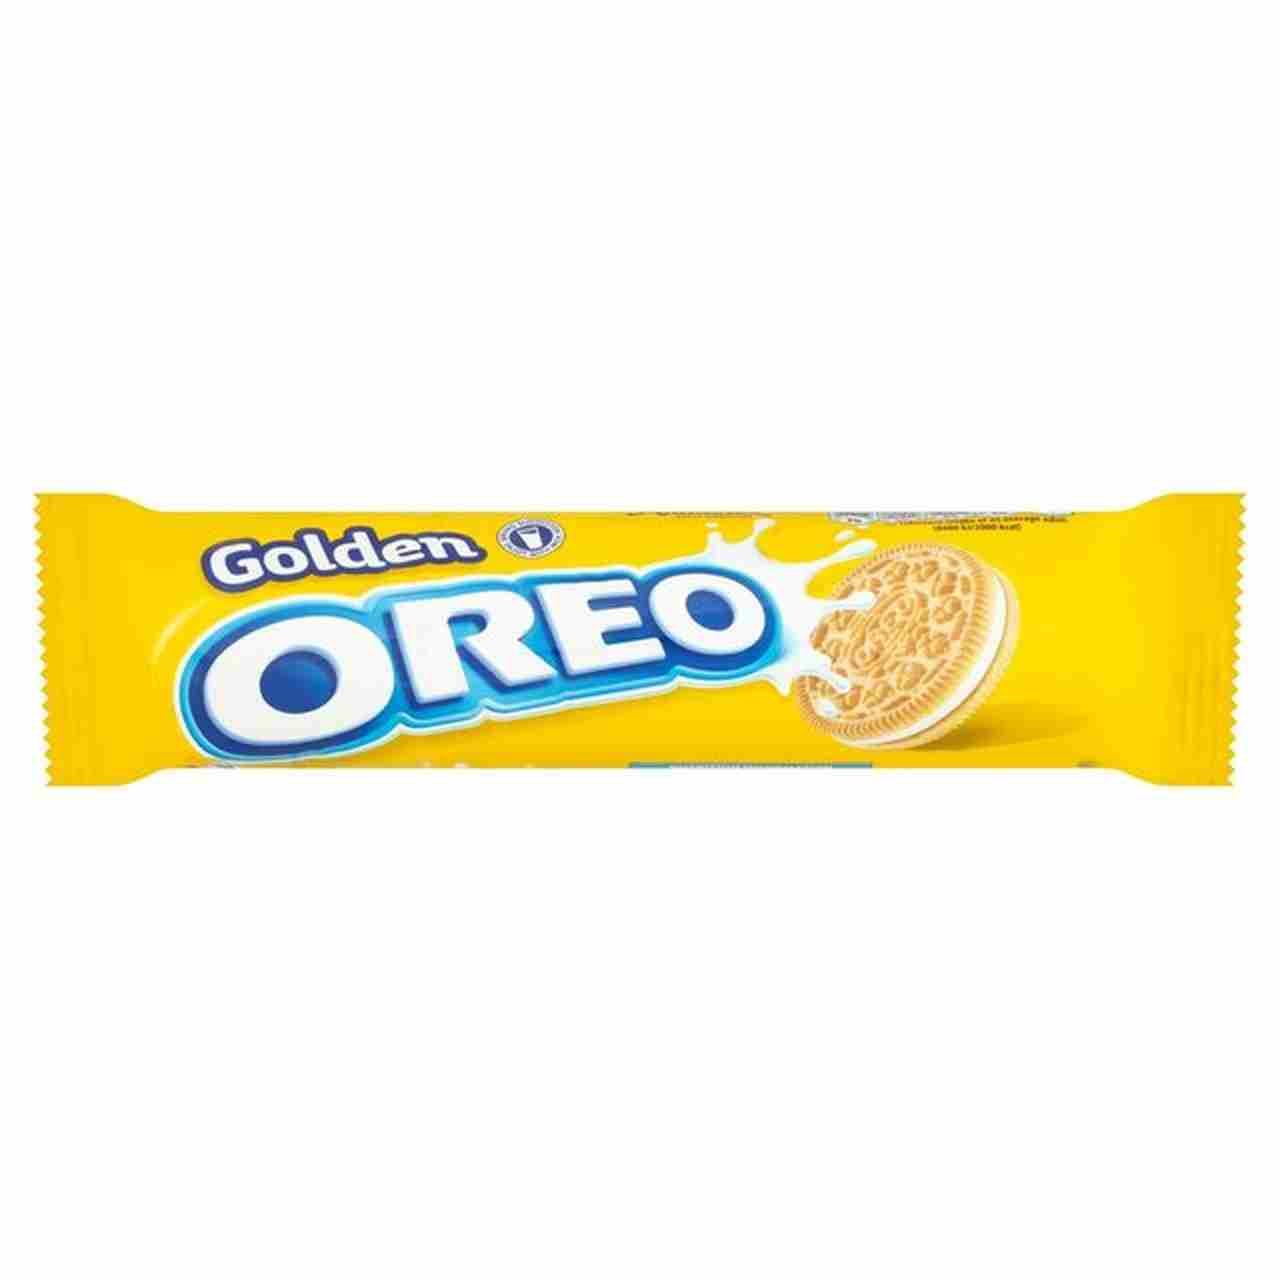 OREO TUBE GOLDEN COOKIES – Basic Food And Drinks